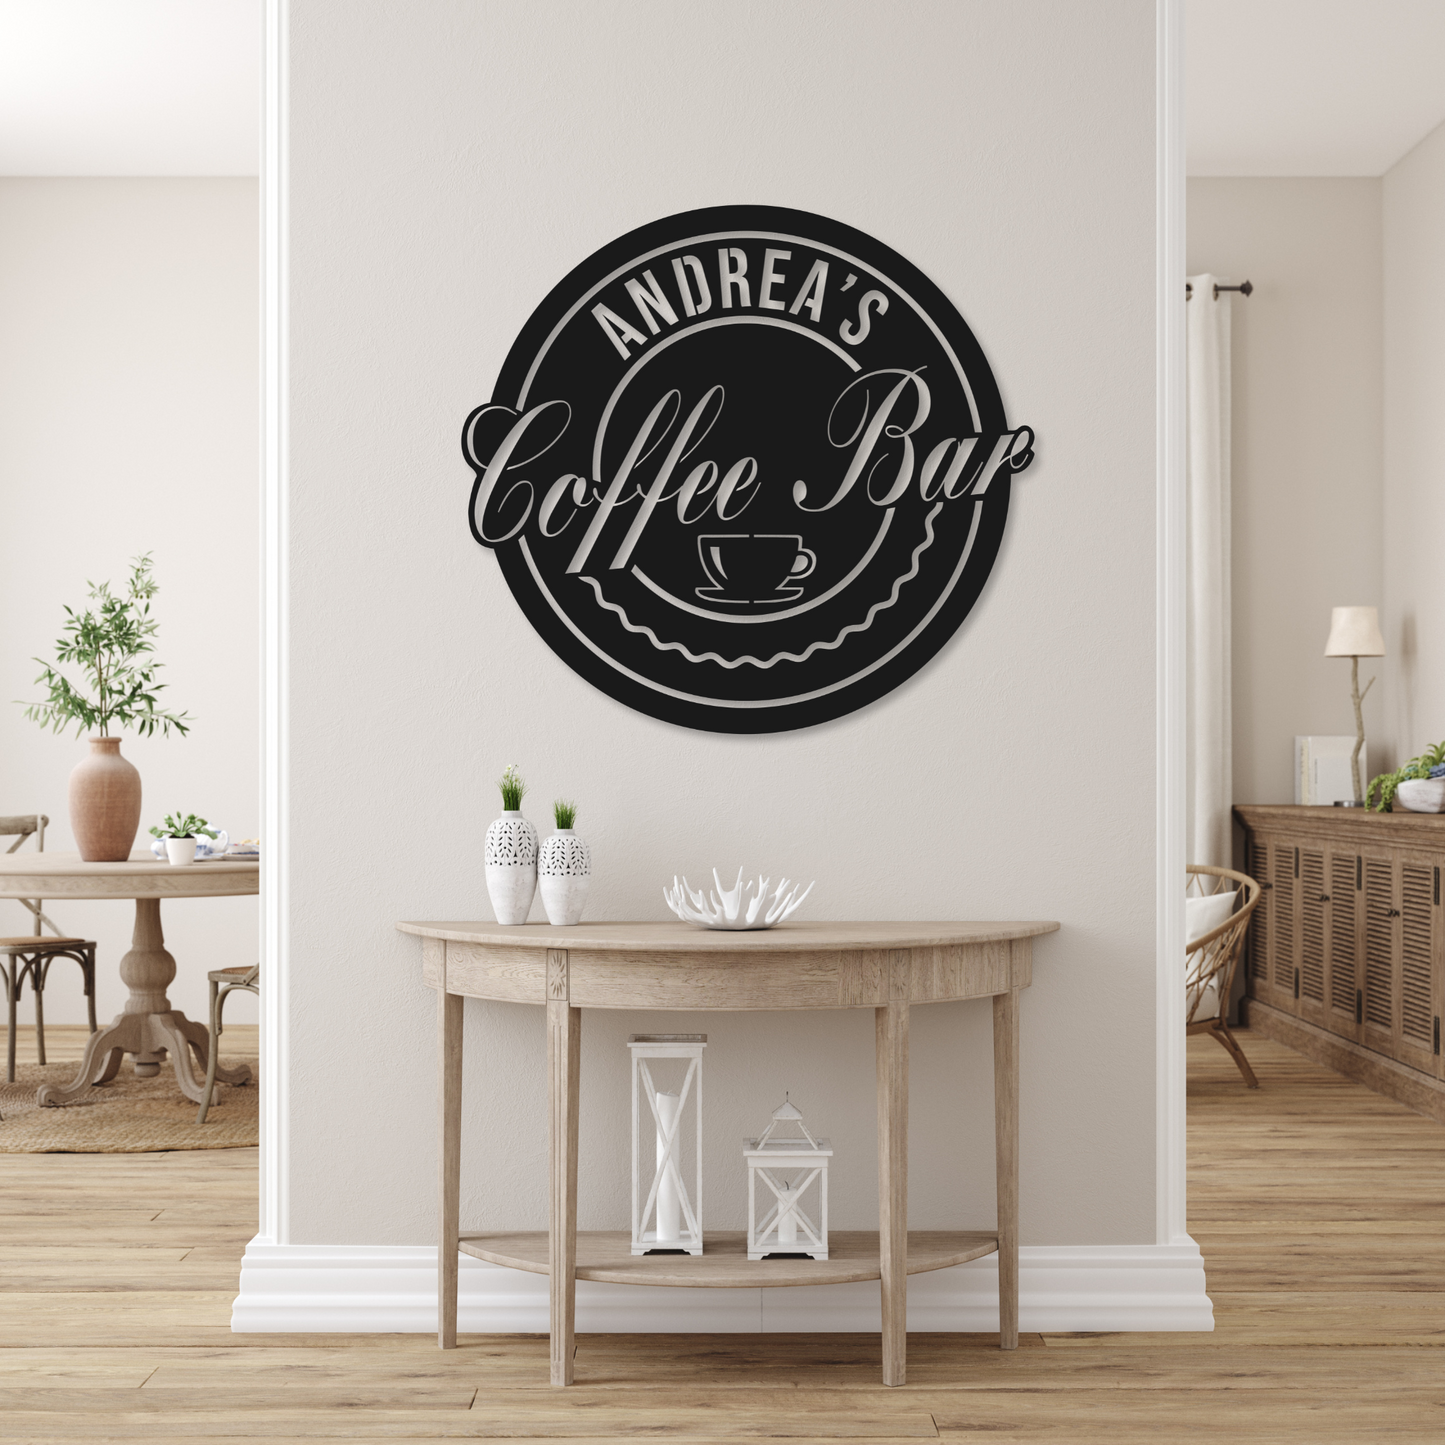 Personalized Coffee Bar Metal Sign | Metal Coffee Sign